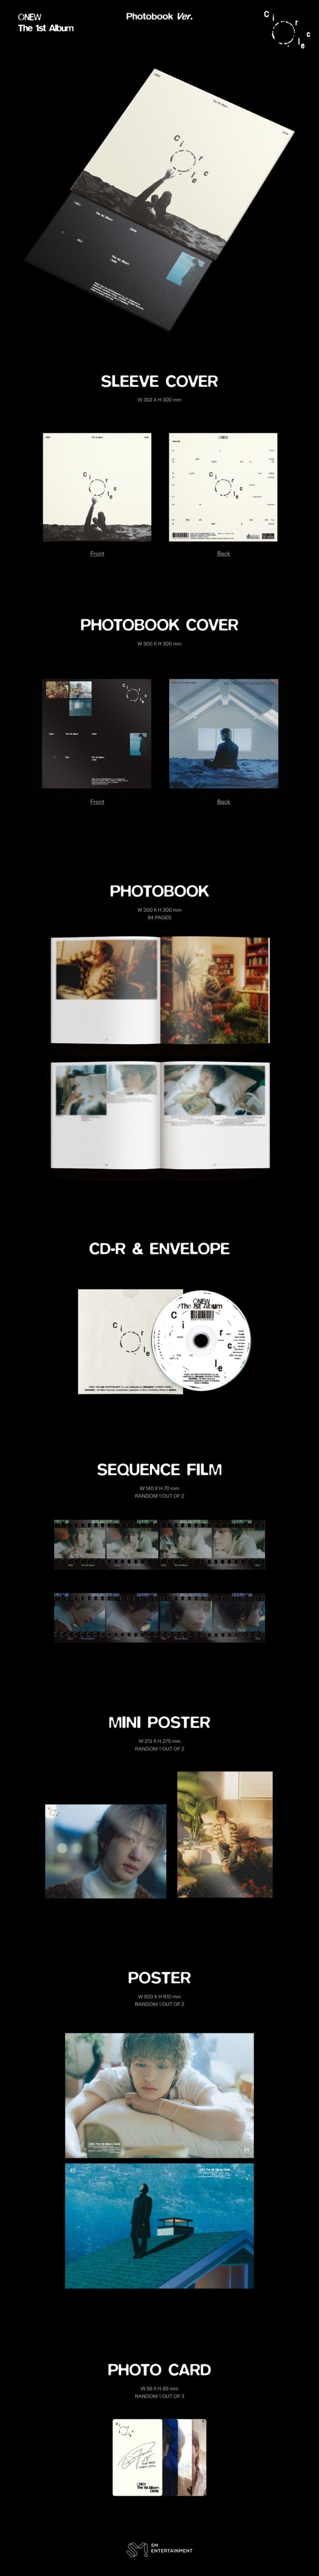 Korea Pop Store ONEW - Vol. 1 [Circle] Photobook Ver. with Pre-Order Poster Kawaii Gifts